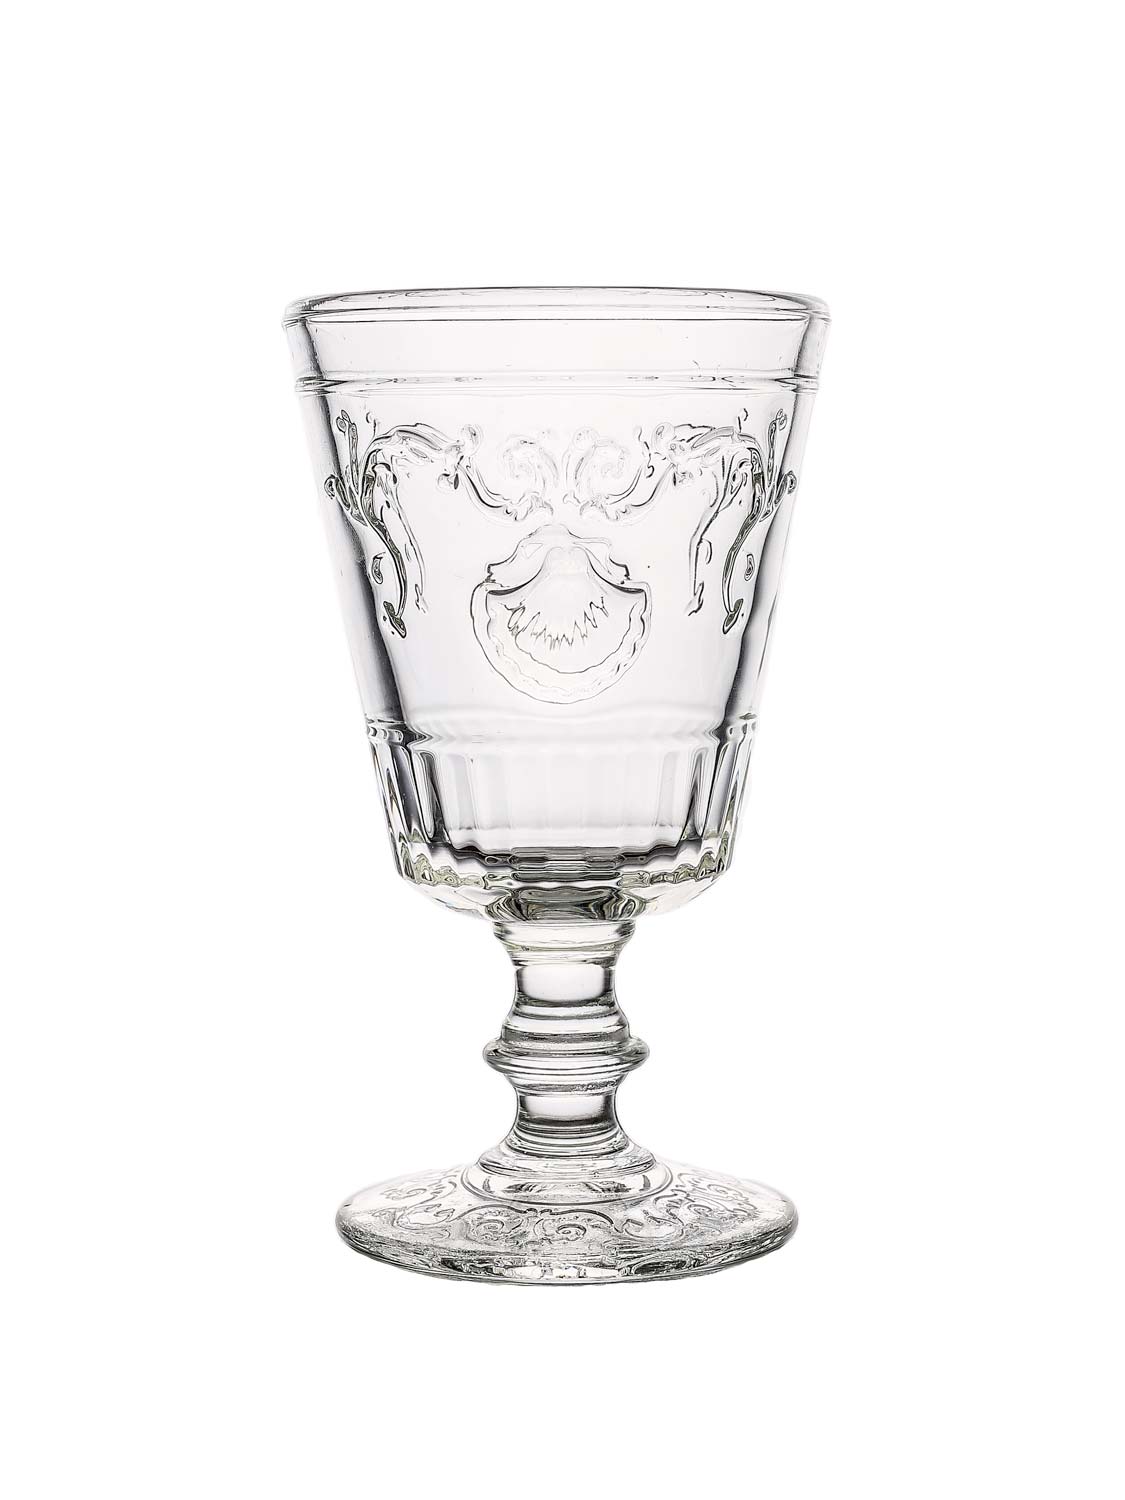 White wine glass with decoration